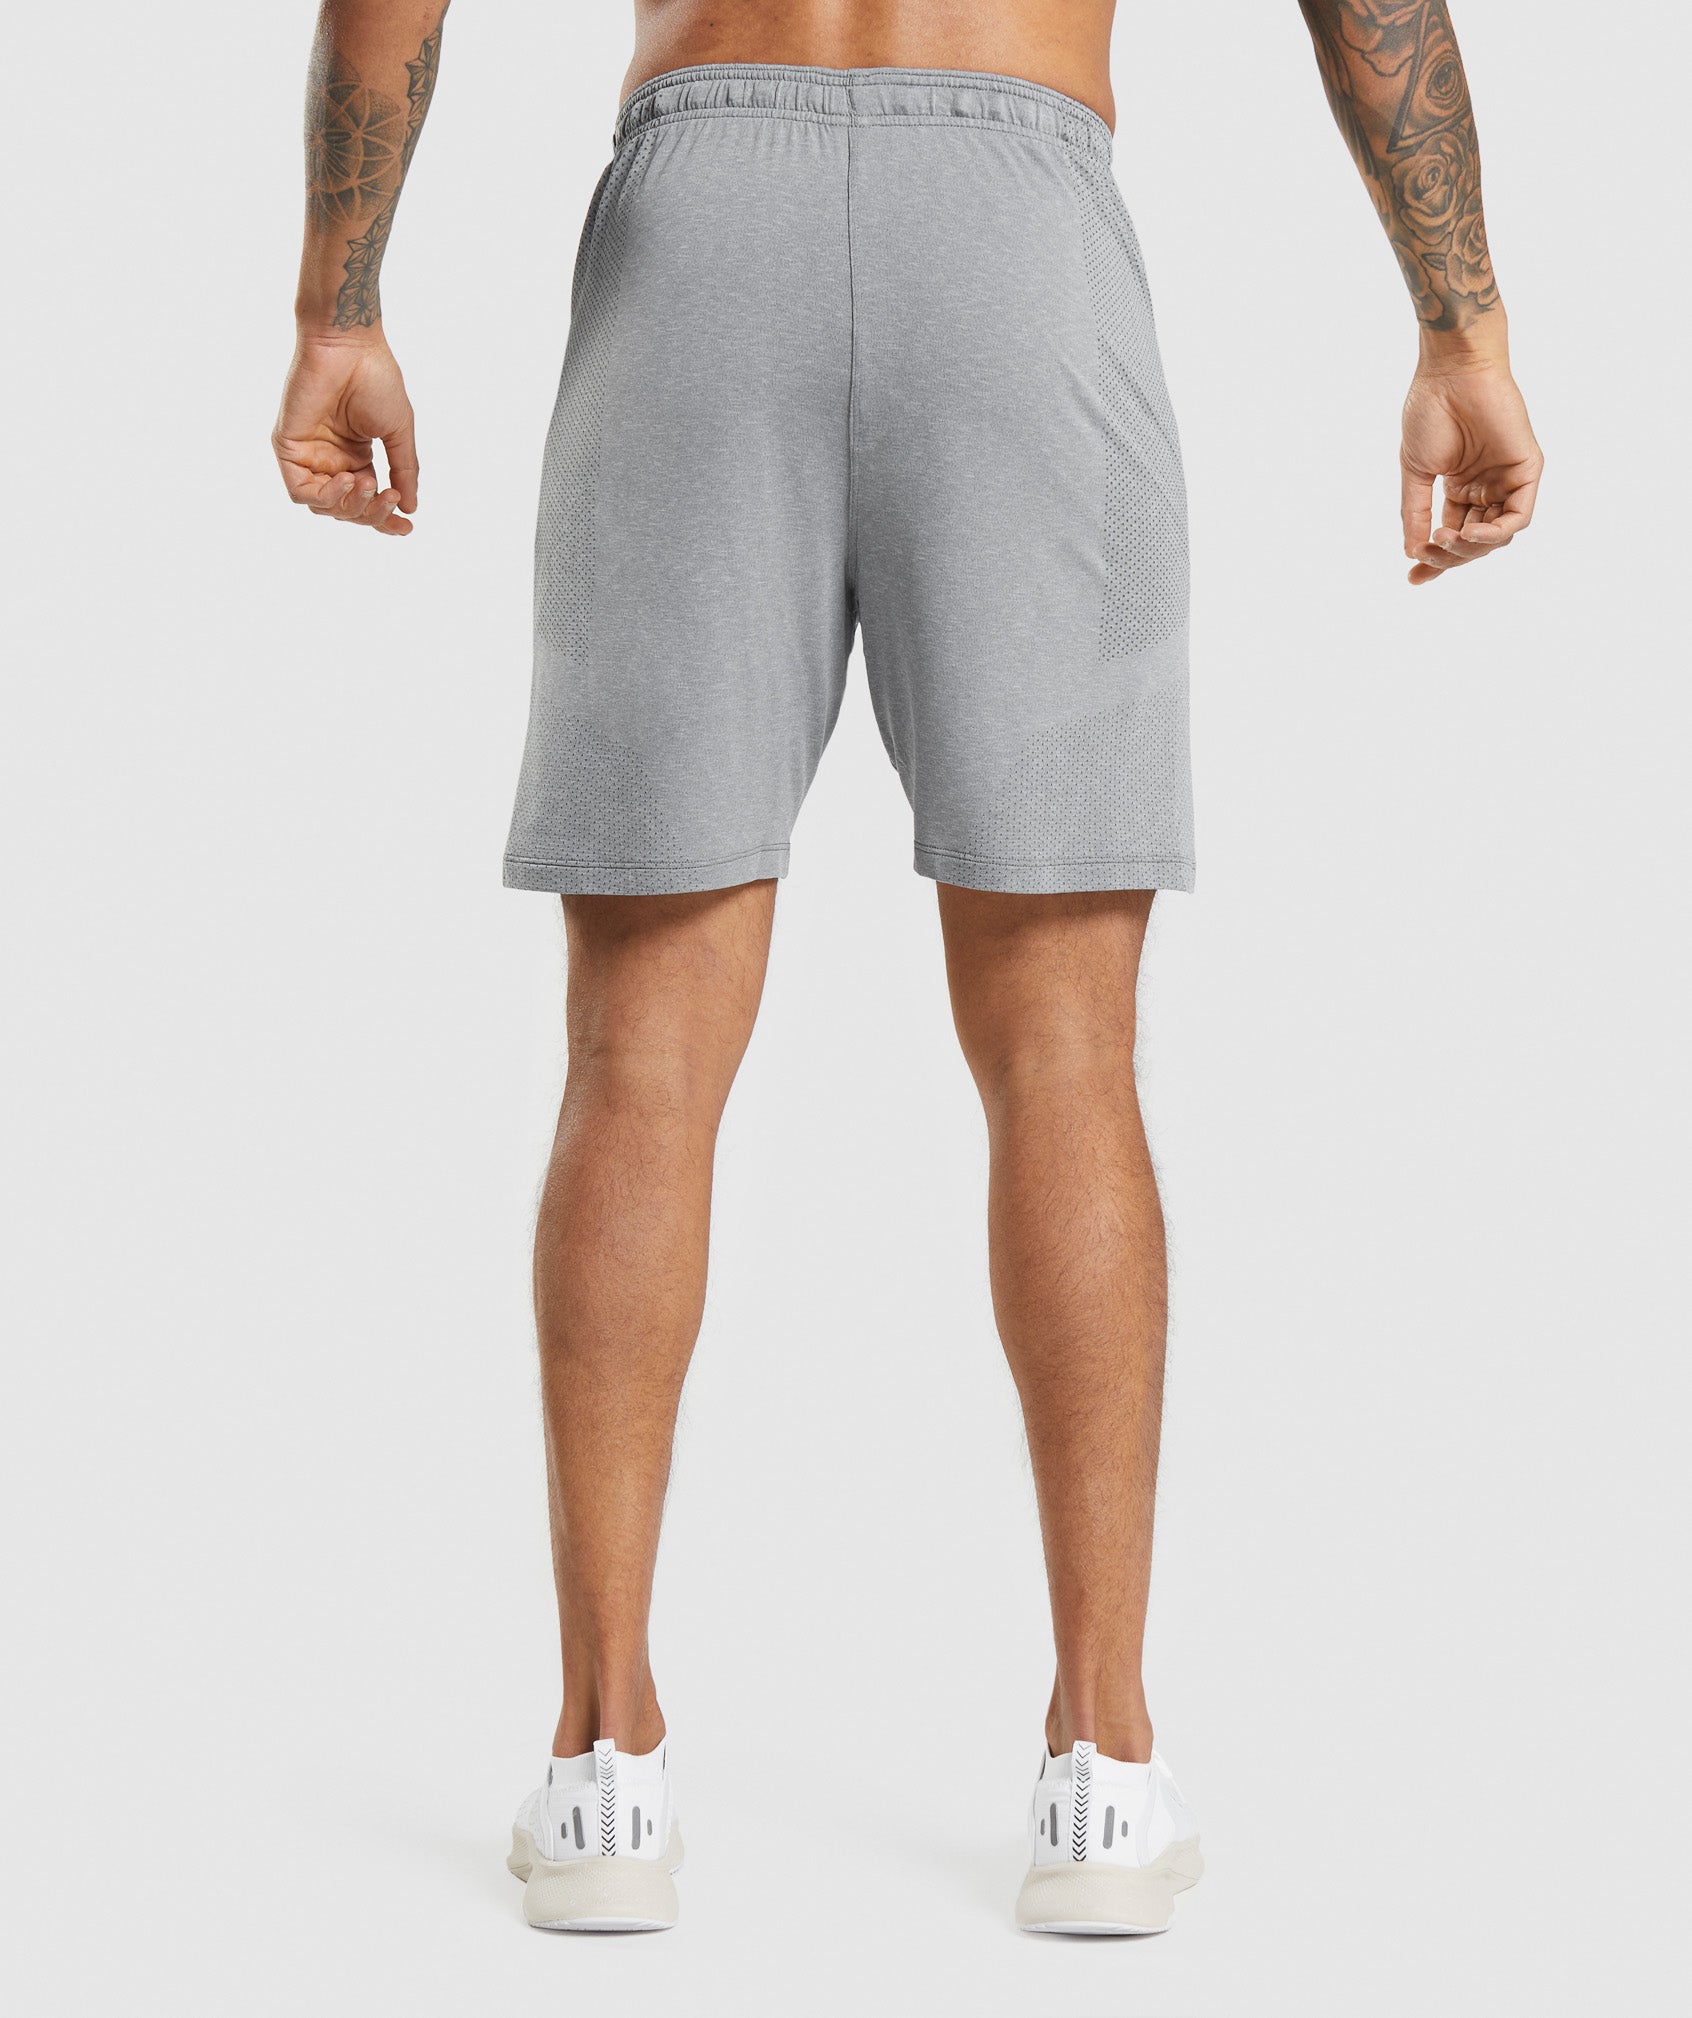 Vital Light Shorts in Charcoal Grey Marl - view 2